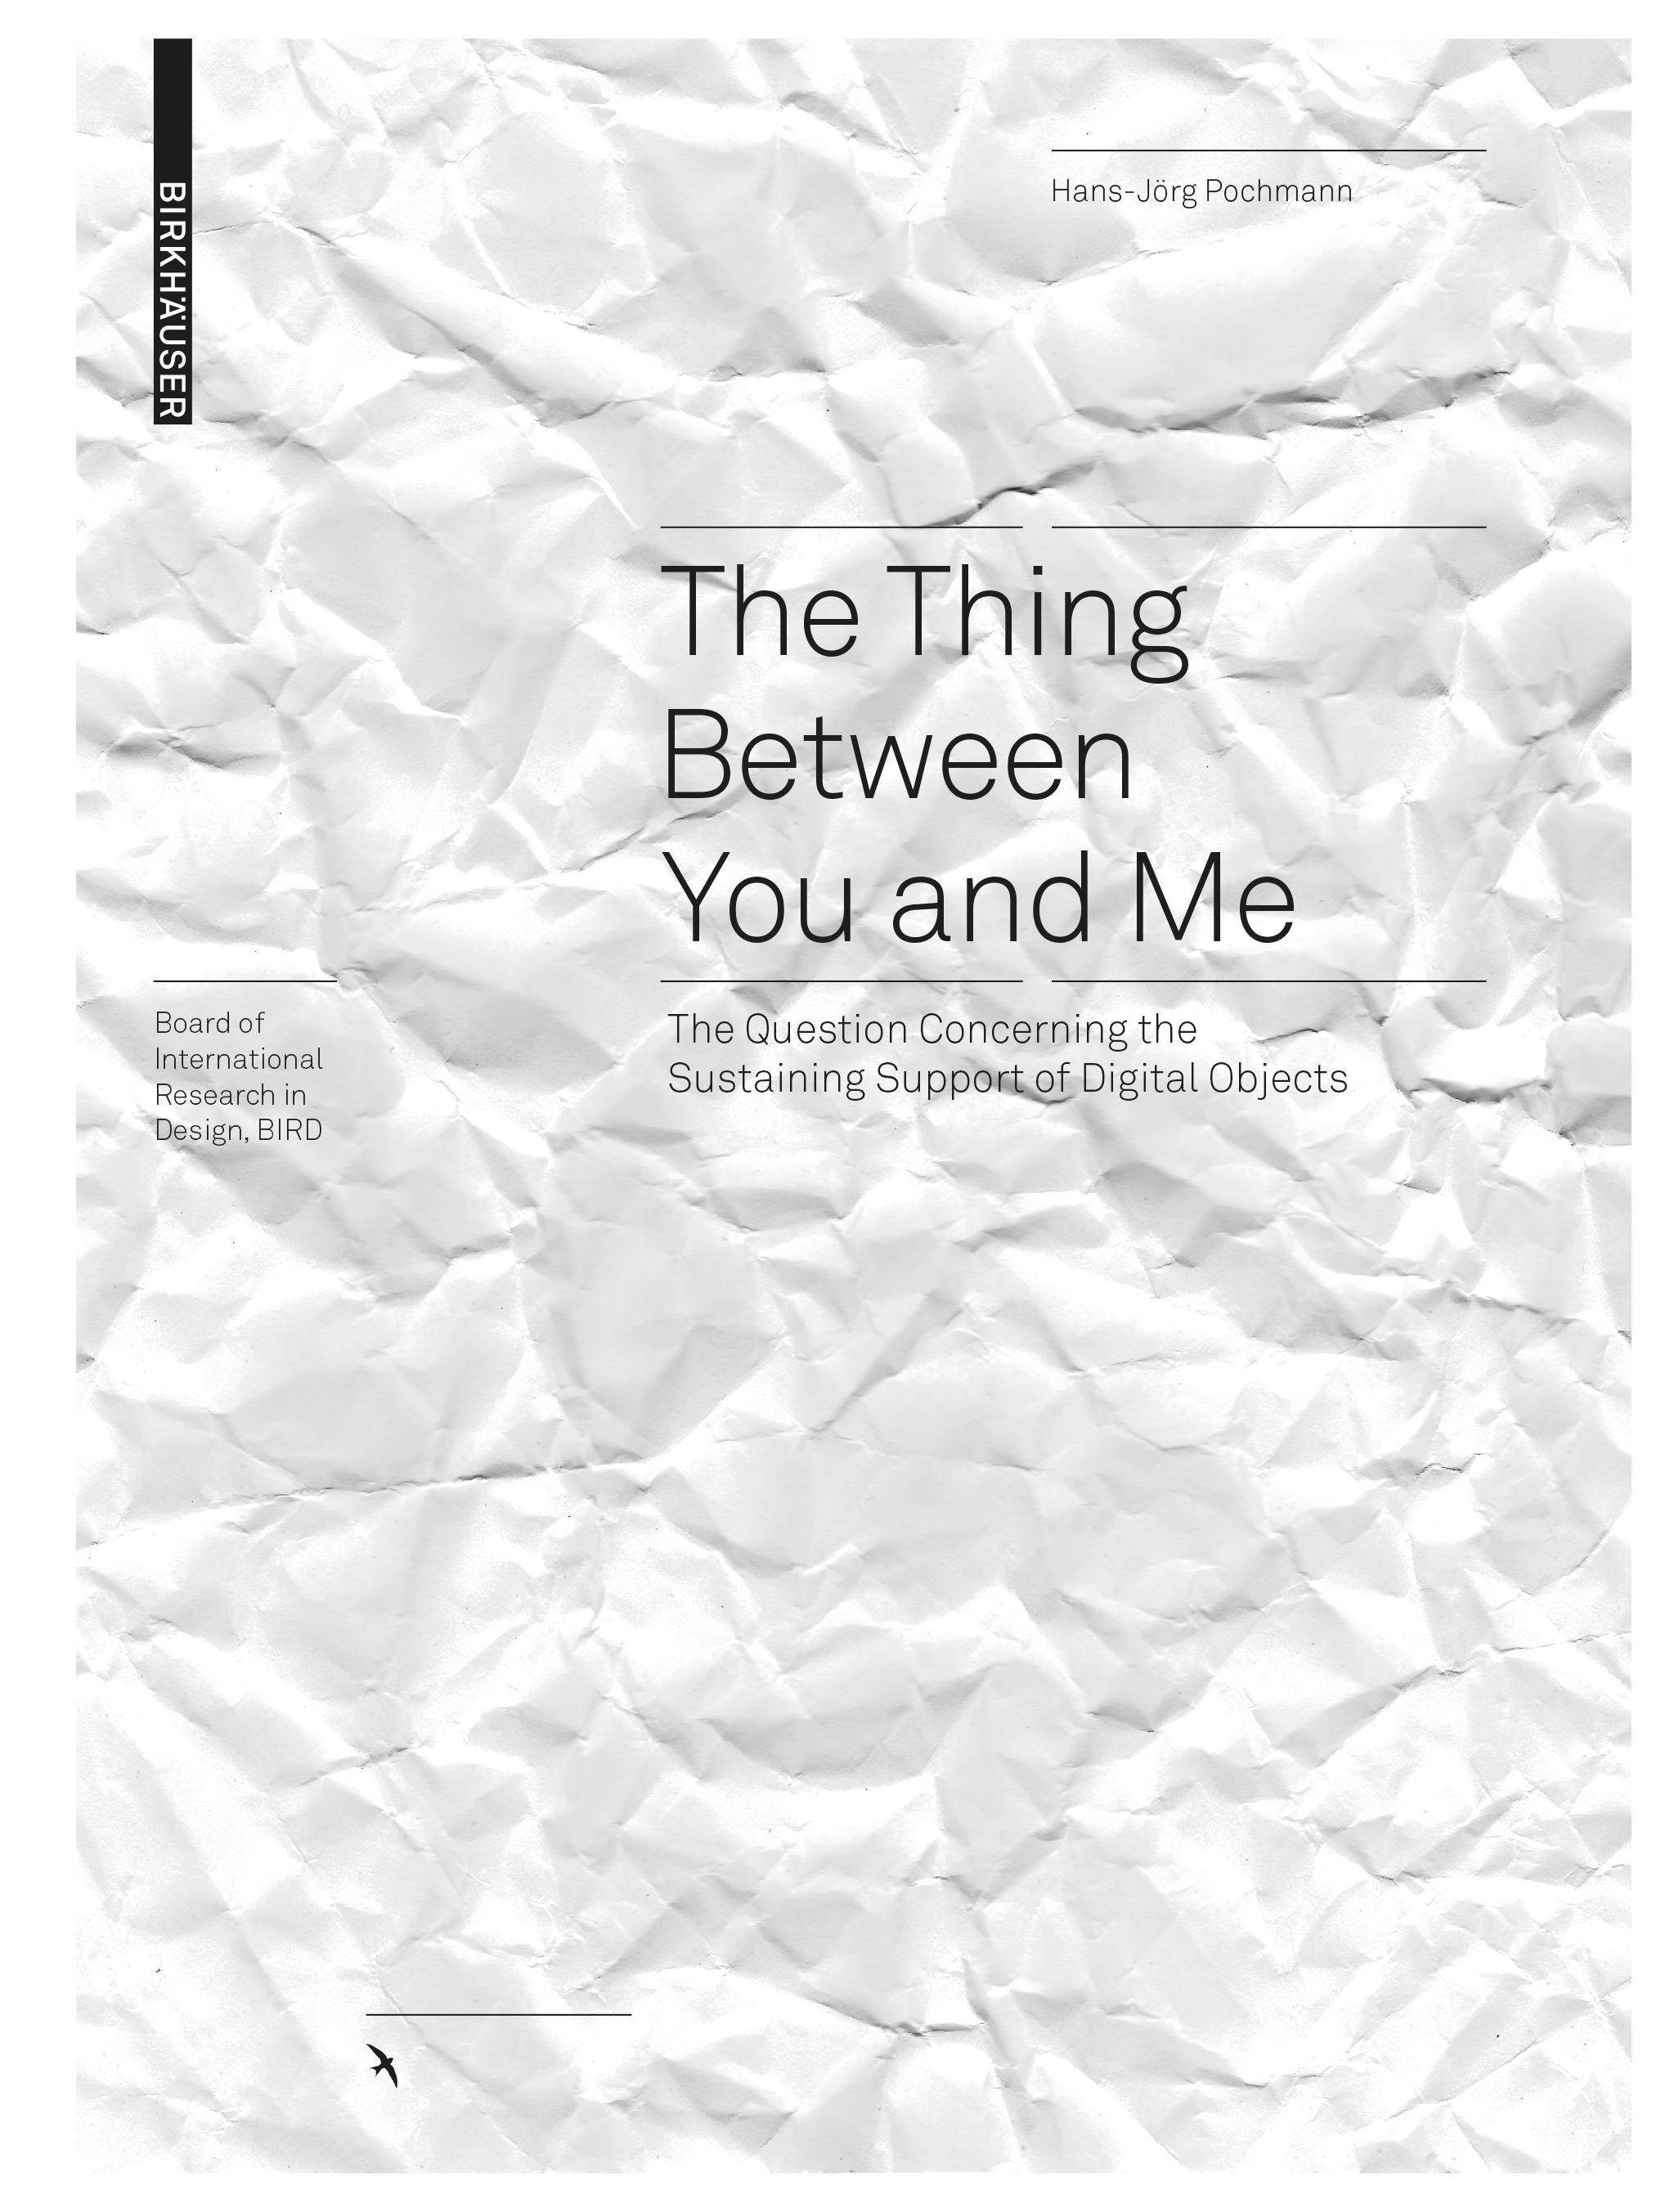 The Thing between You and Me's cover